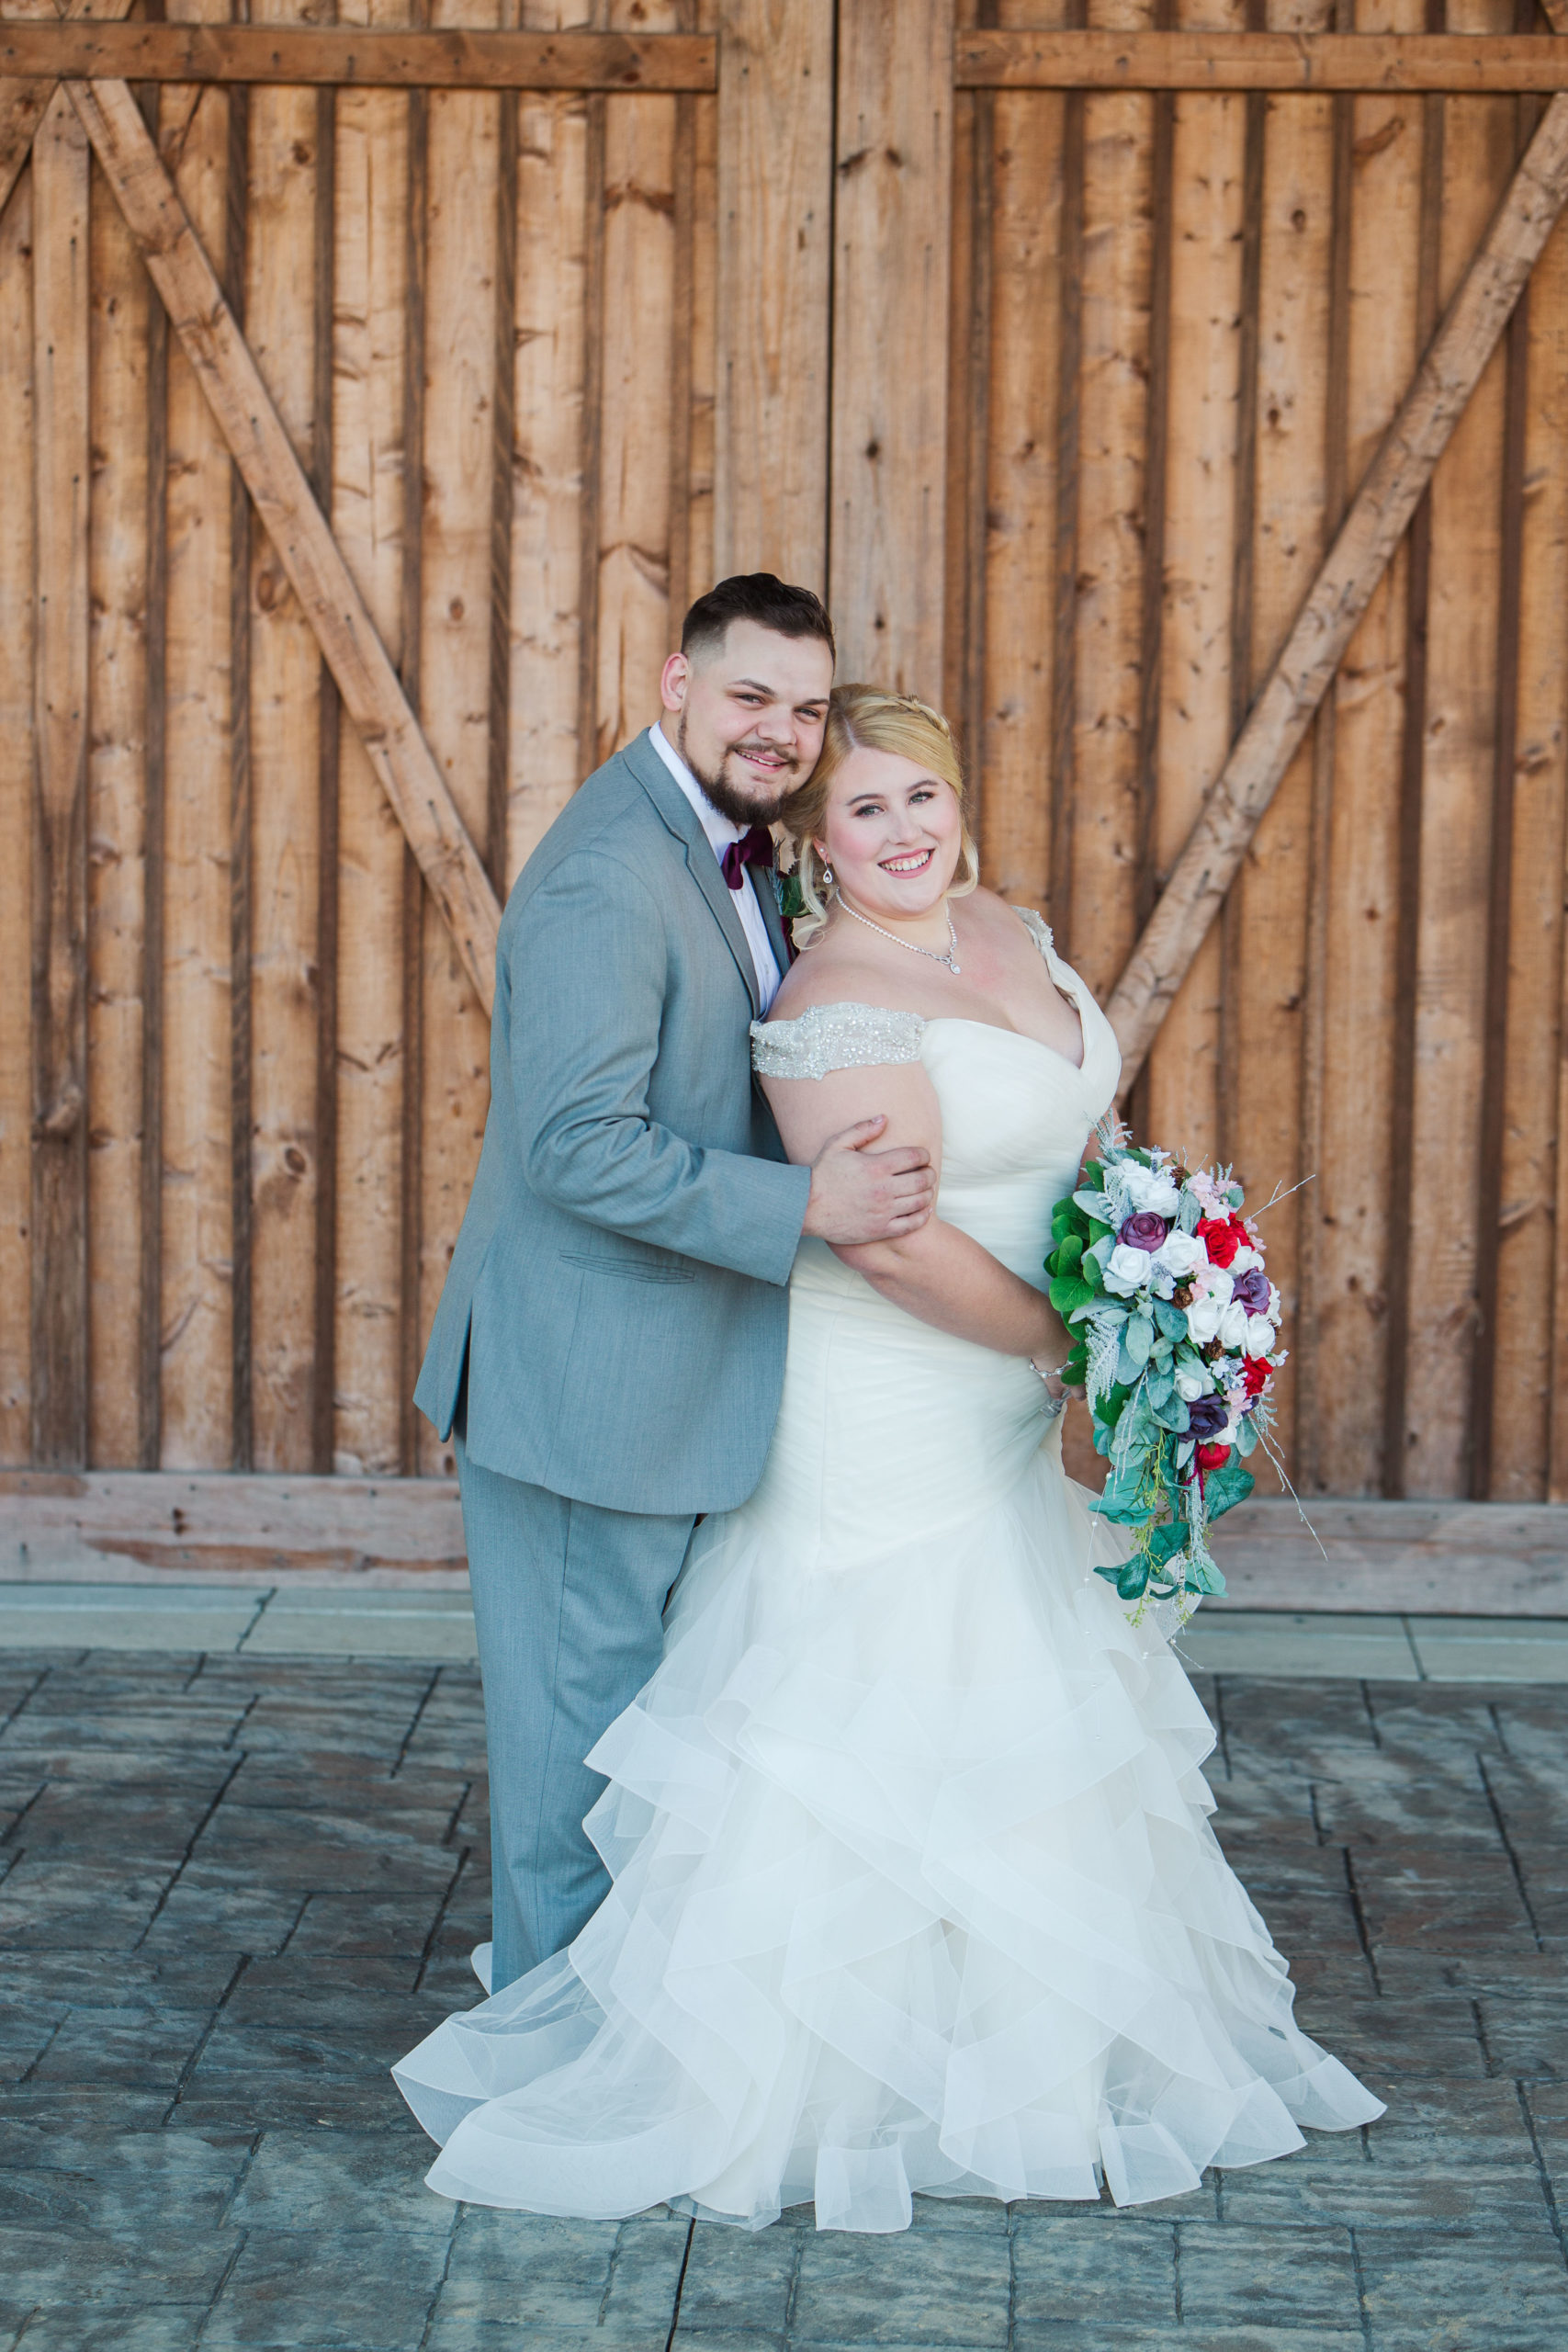 Romantic portraits on wedding day at Wright Memorial Event Center